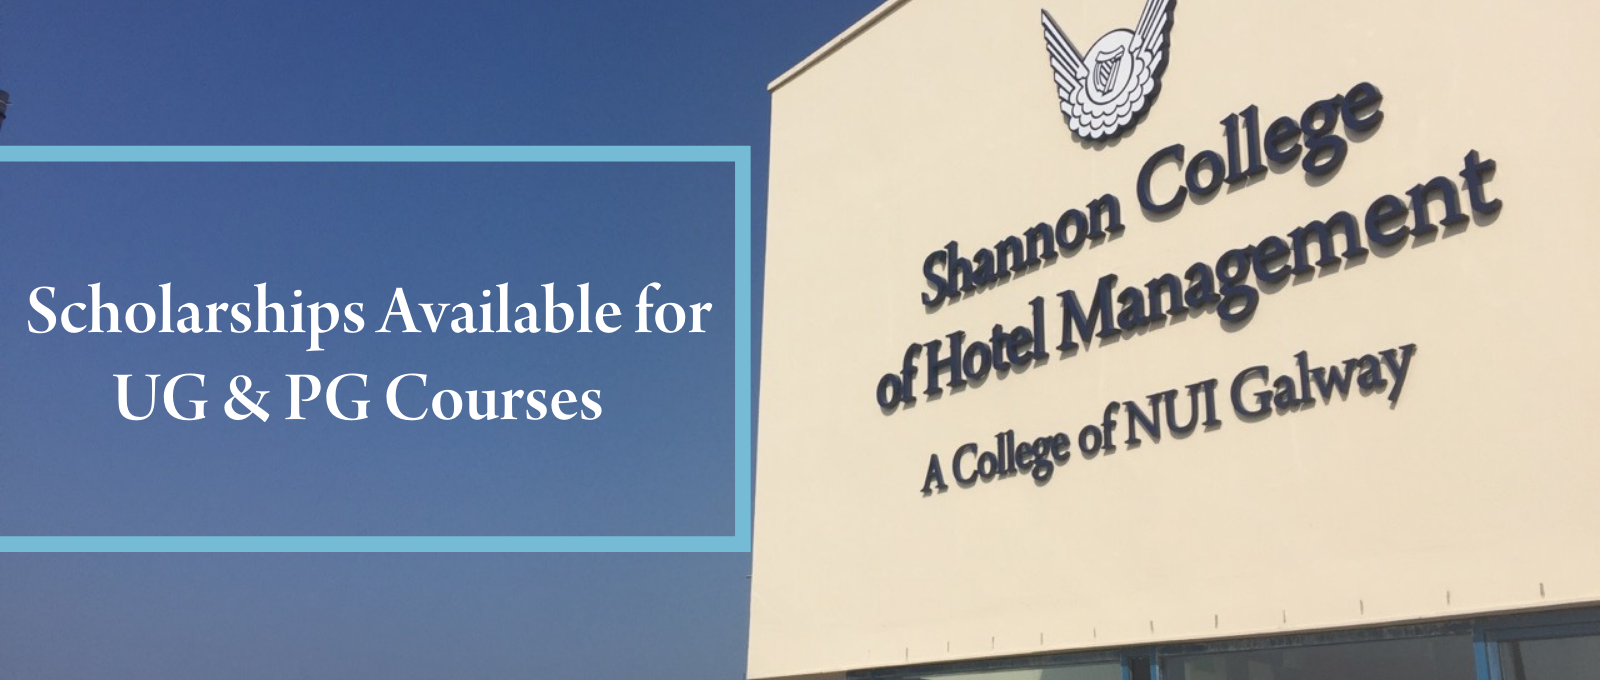 Shannon College Scholarships 